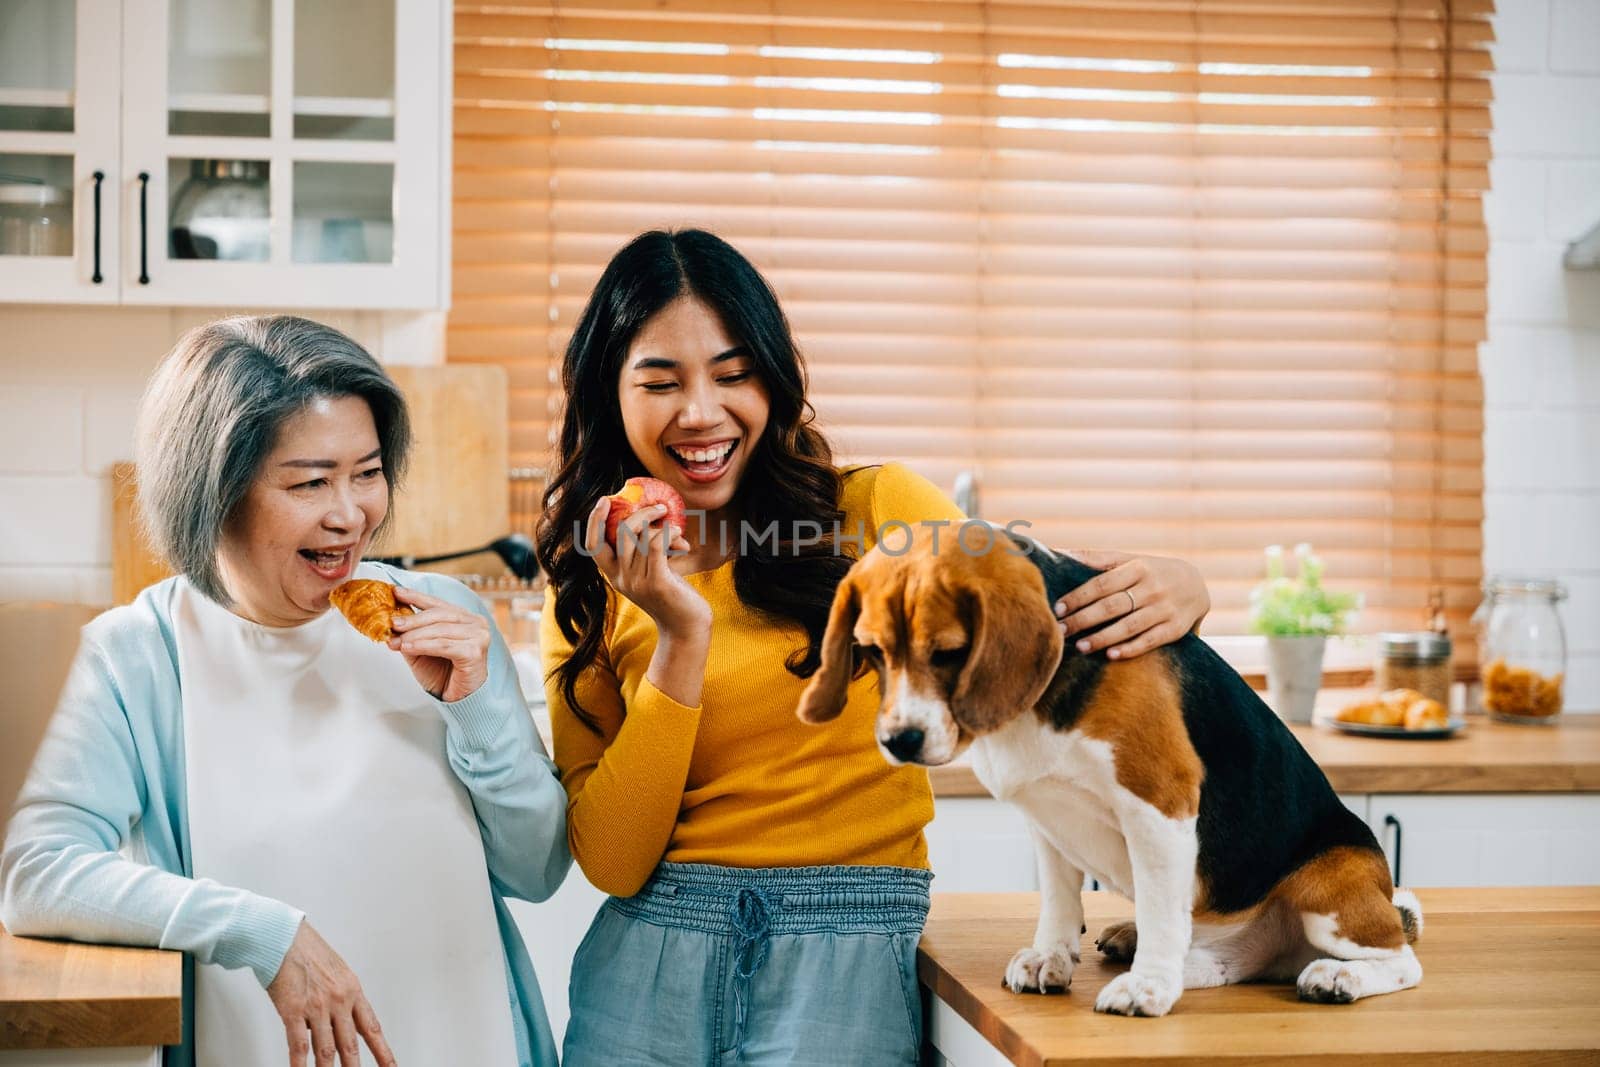 In the cozy kitchen of their home, a young Asian woman, her mother, and their beagle dog enjoy quality time together. This image embodies the concept of family, fun, and pet happiness. Pet love